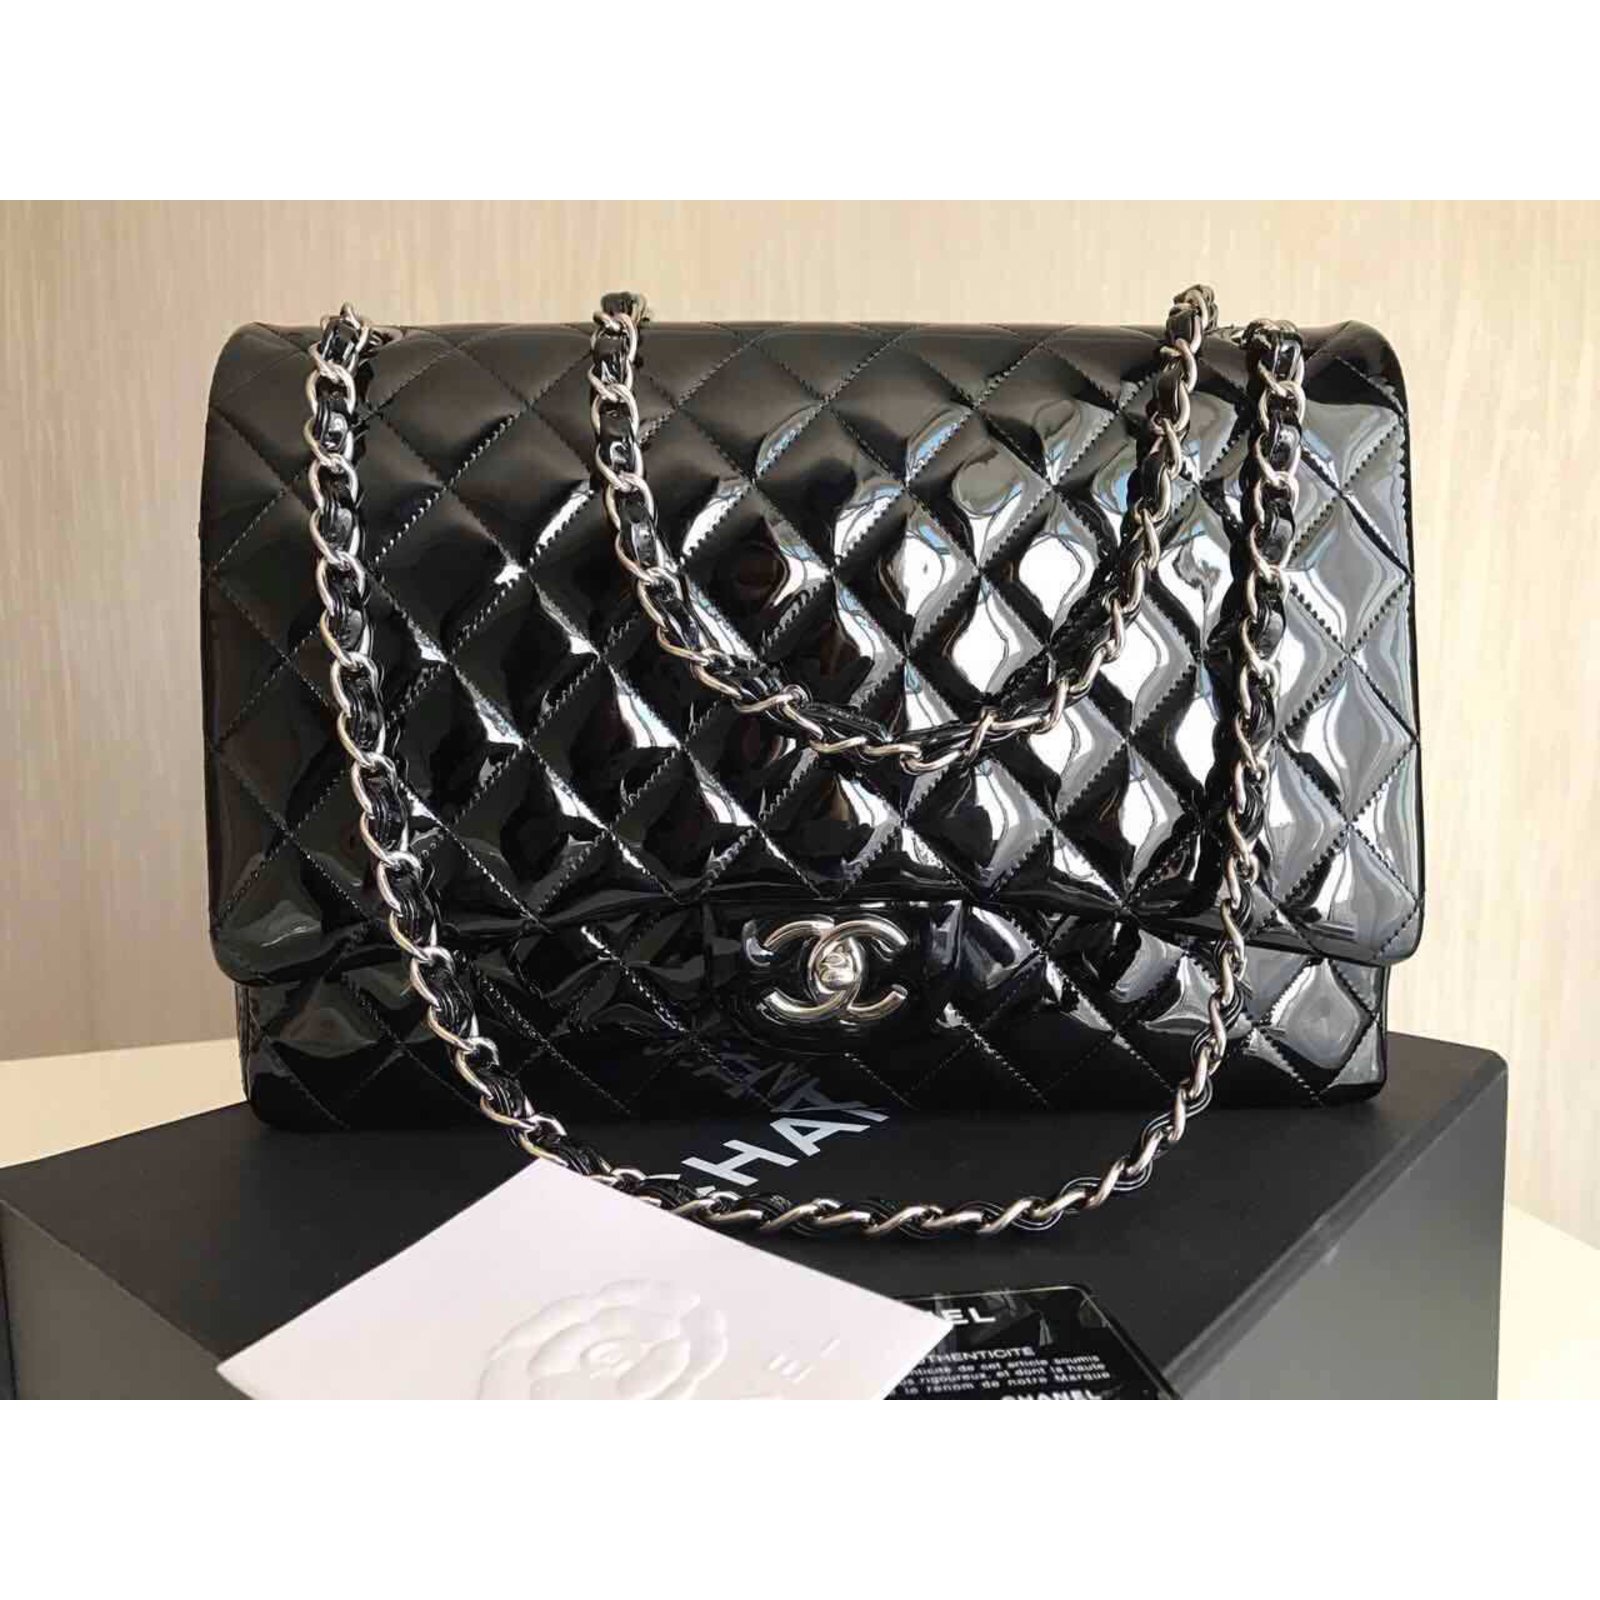 A BLACK PATENT LEATHER CHAIN AROUND MAXI FLAP BAG WITH GOLD HARDWARE